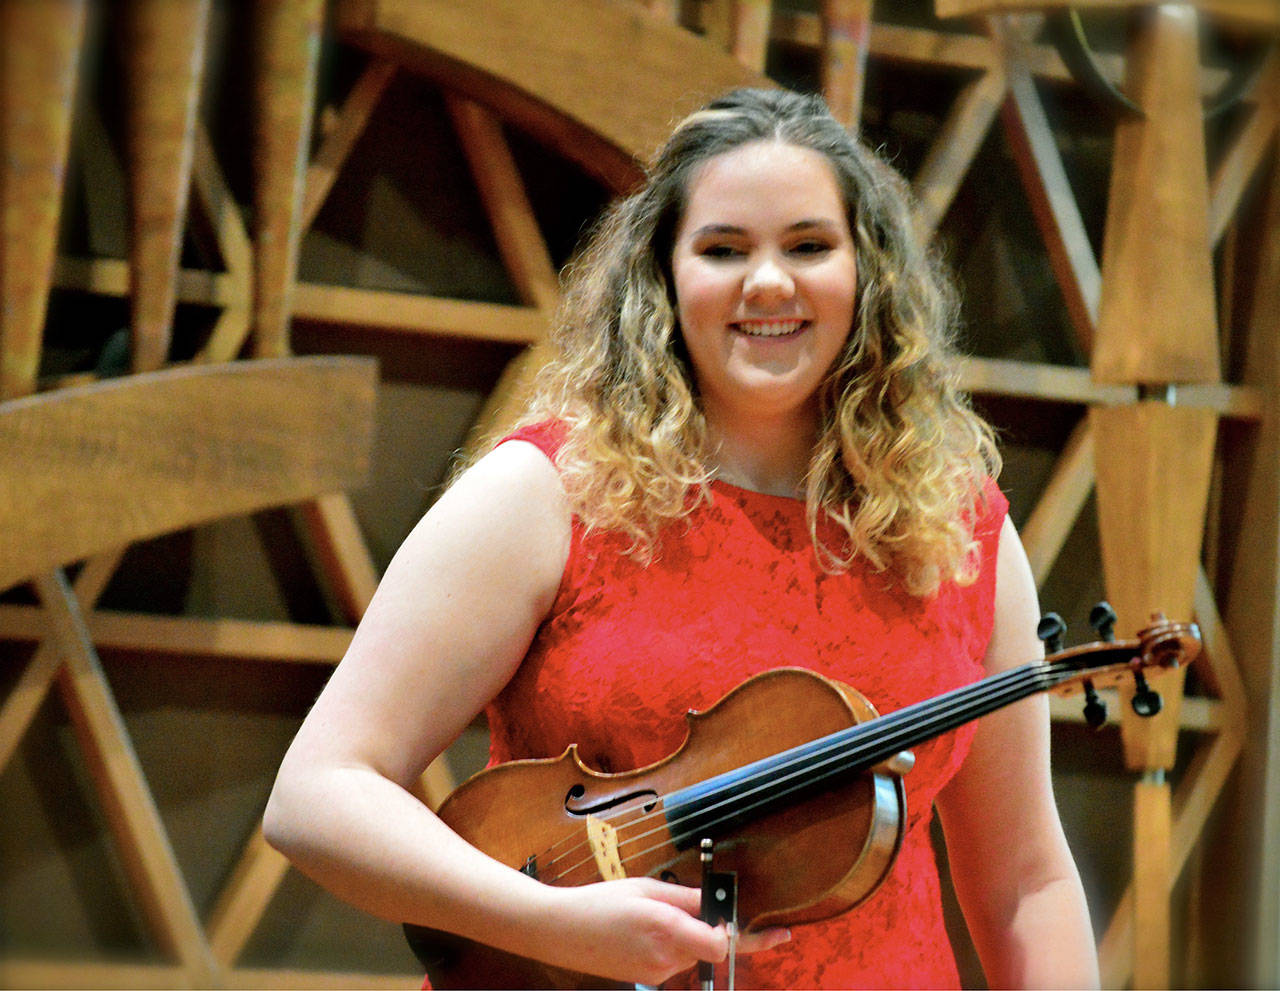 Lauren Waldron, now a student at the College of Idaho, will be back home for a performance Saturday at Concert & Cuisine at C’est si Bon restaurant. (Diane Urbani de la Paz)